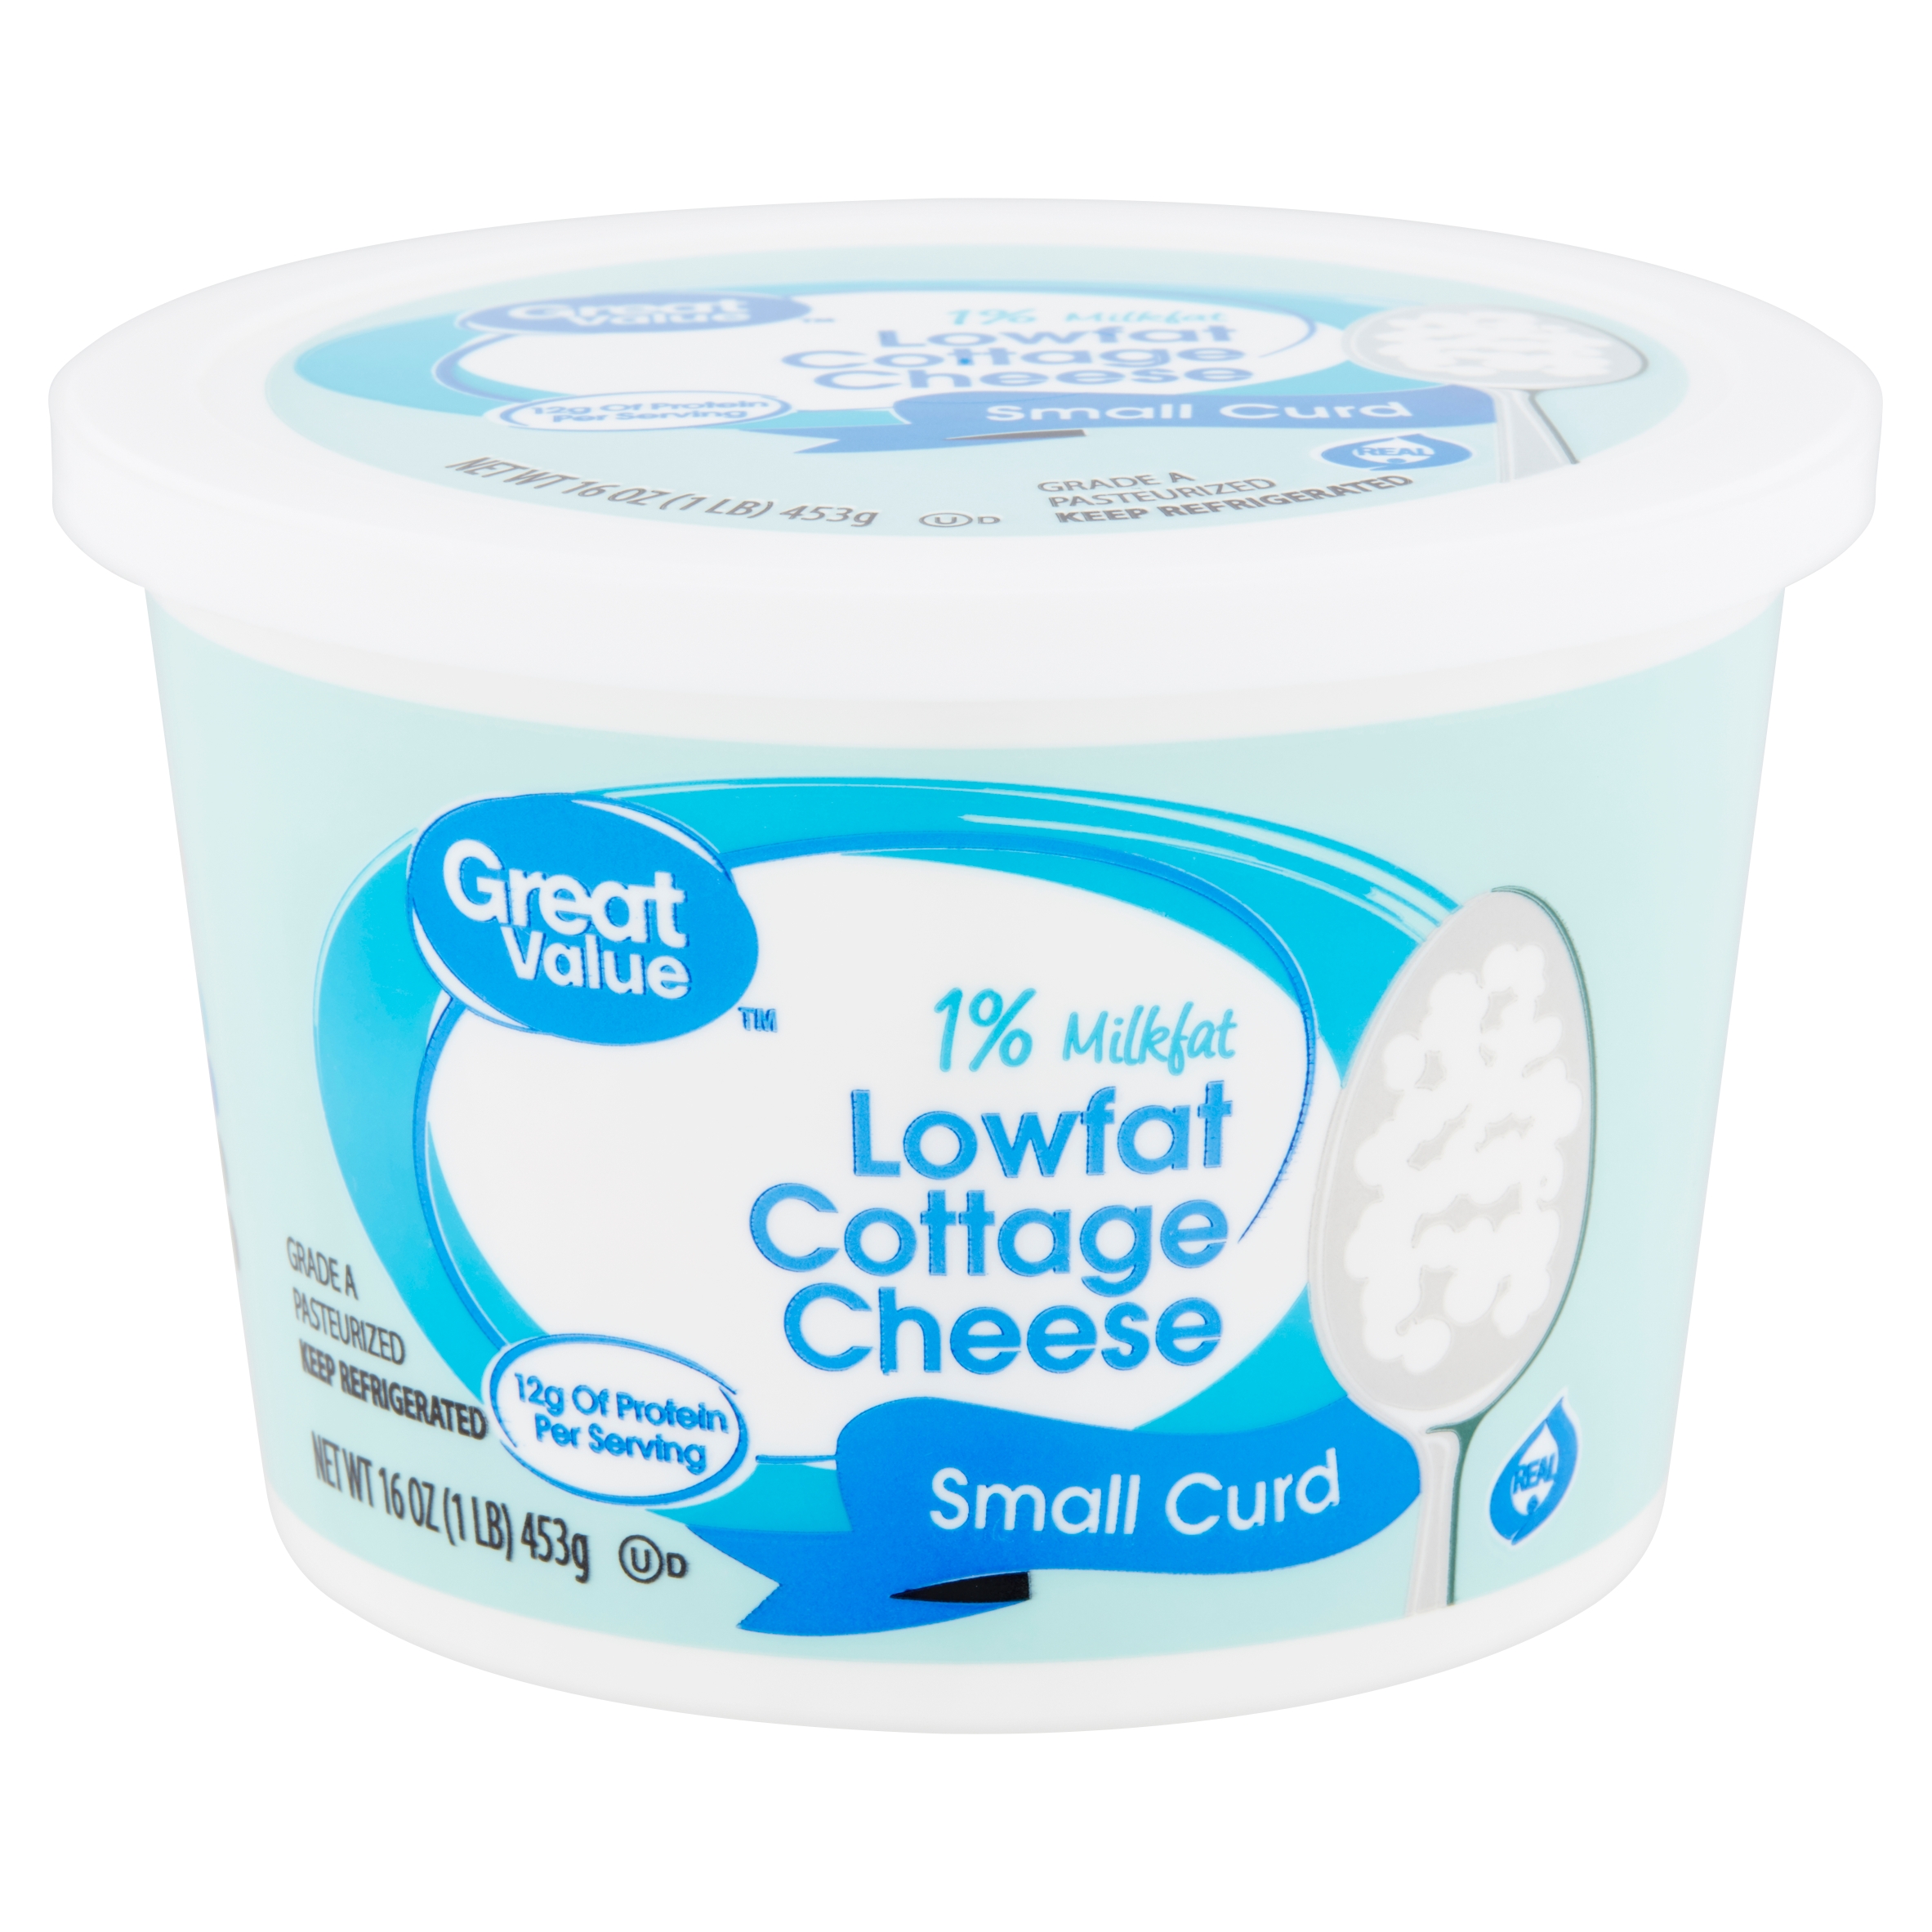 Great Value 1% Milkfat Lowfat Small Curd Cottage Cheese, 16 Oz Image